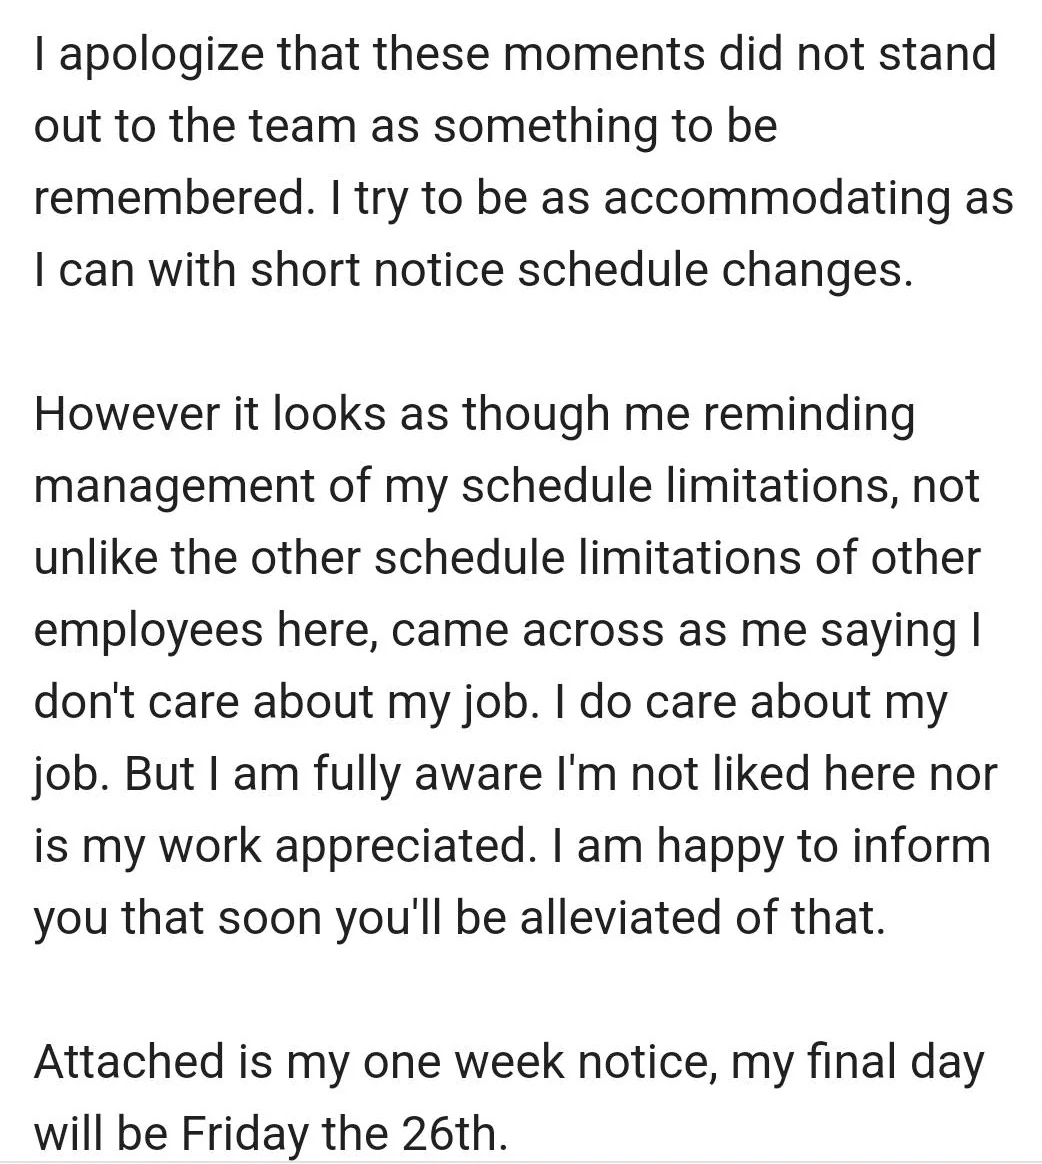 number - I apologize that these moments did not stand out to the team as something to be remembered. I try to be as accommodating as I can with short notice schedule changes. However it looks as though me reminding management of my schedule limitations, n